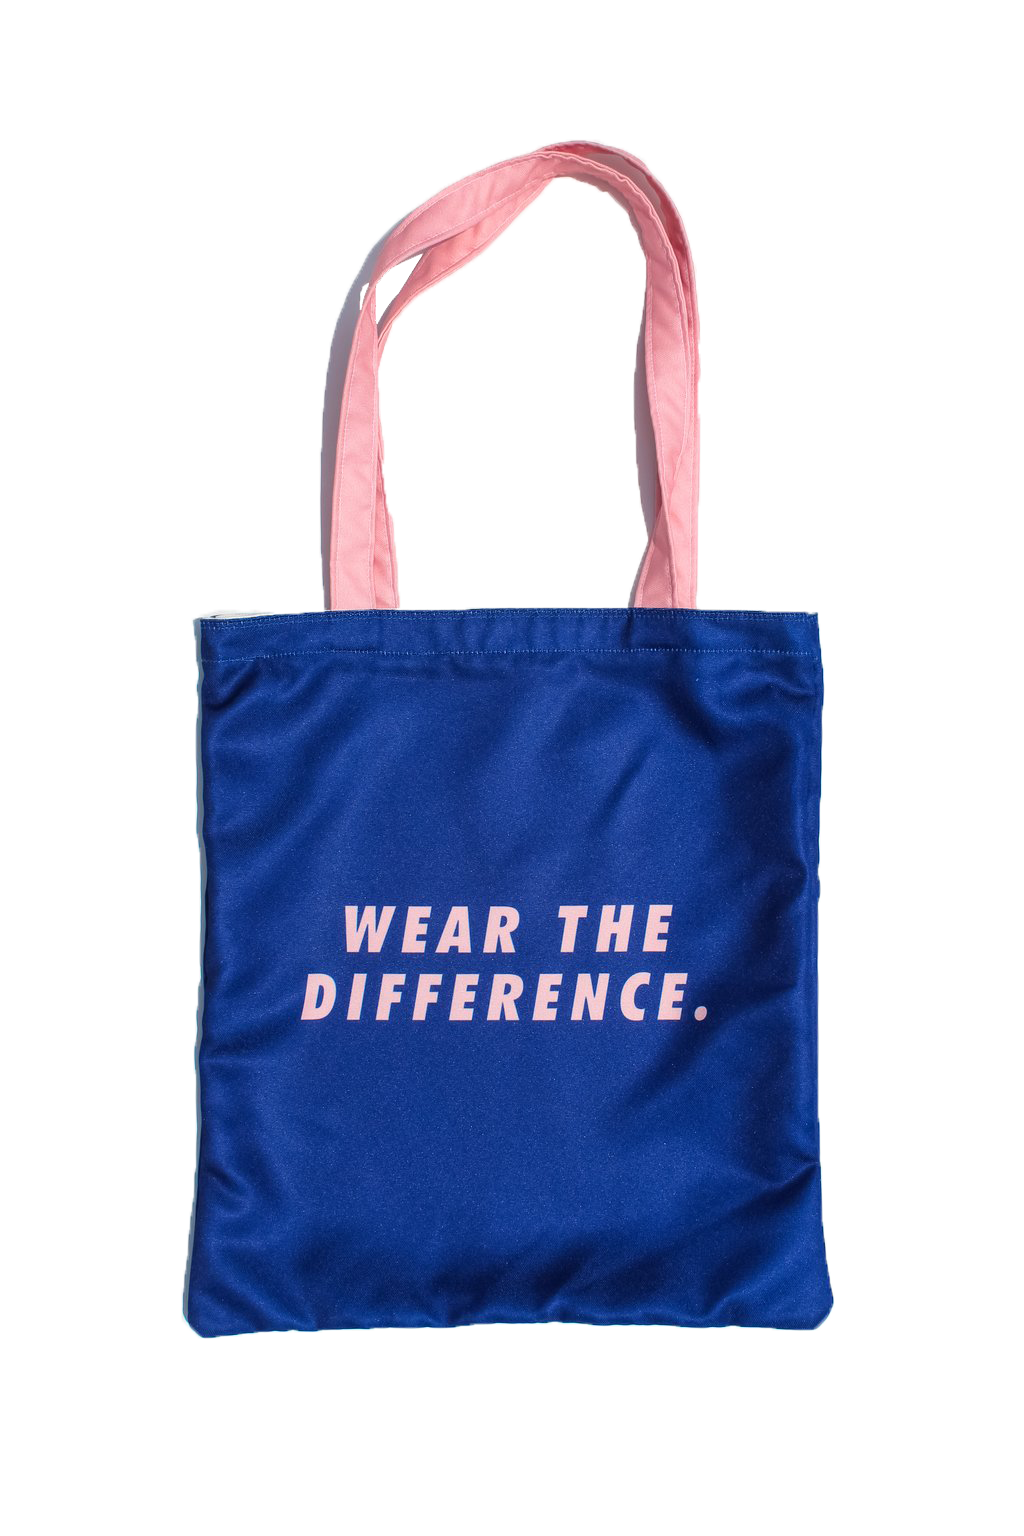 Wear the Difference Tote Bag